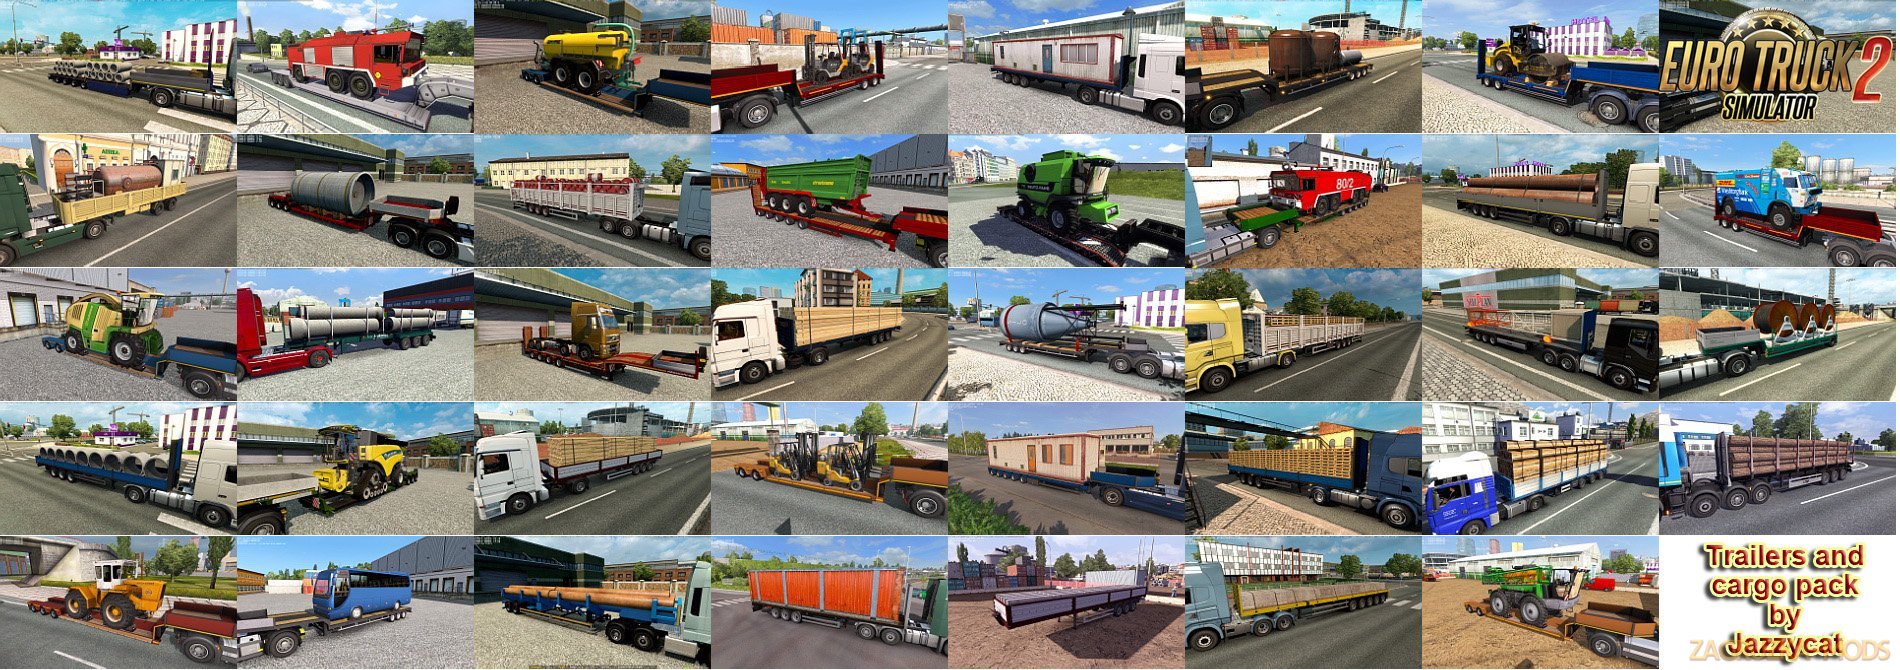 Trailers and Cargo Pack v6.7 by Jazzycat